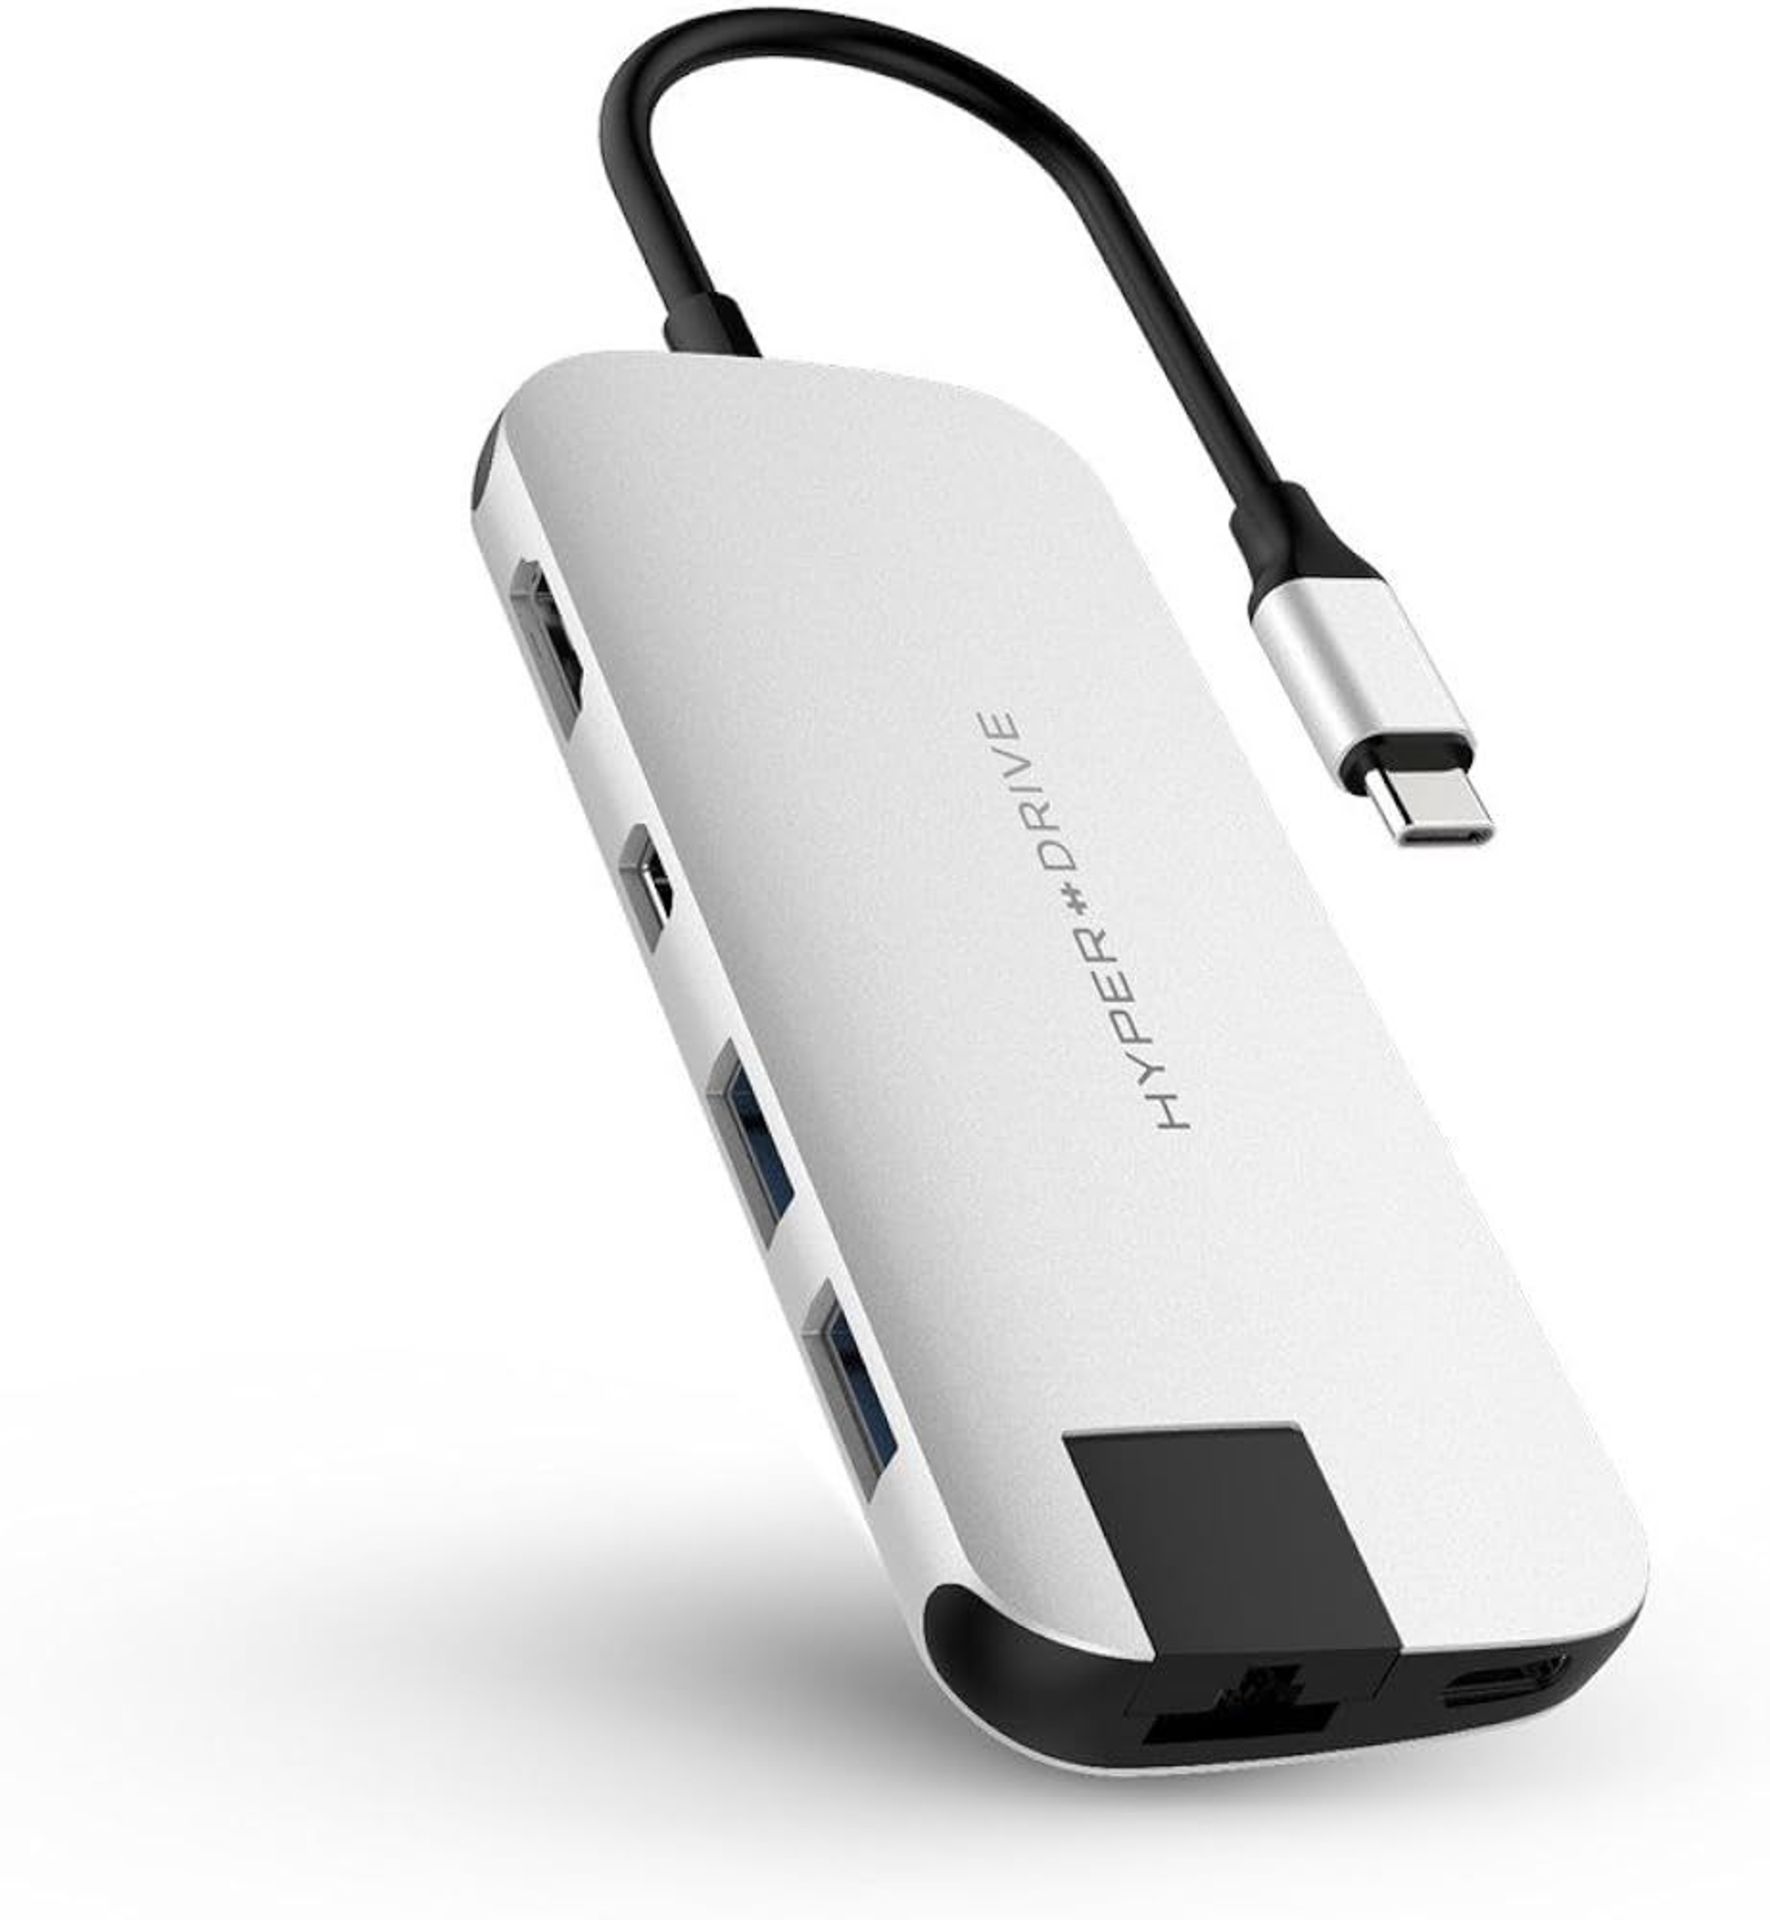 HyperDrive Slim 8-in-1 USB-C Hub. - P7. It expands your connectivity with 8 ports, including gigabit